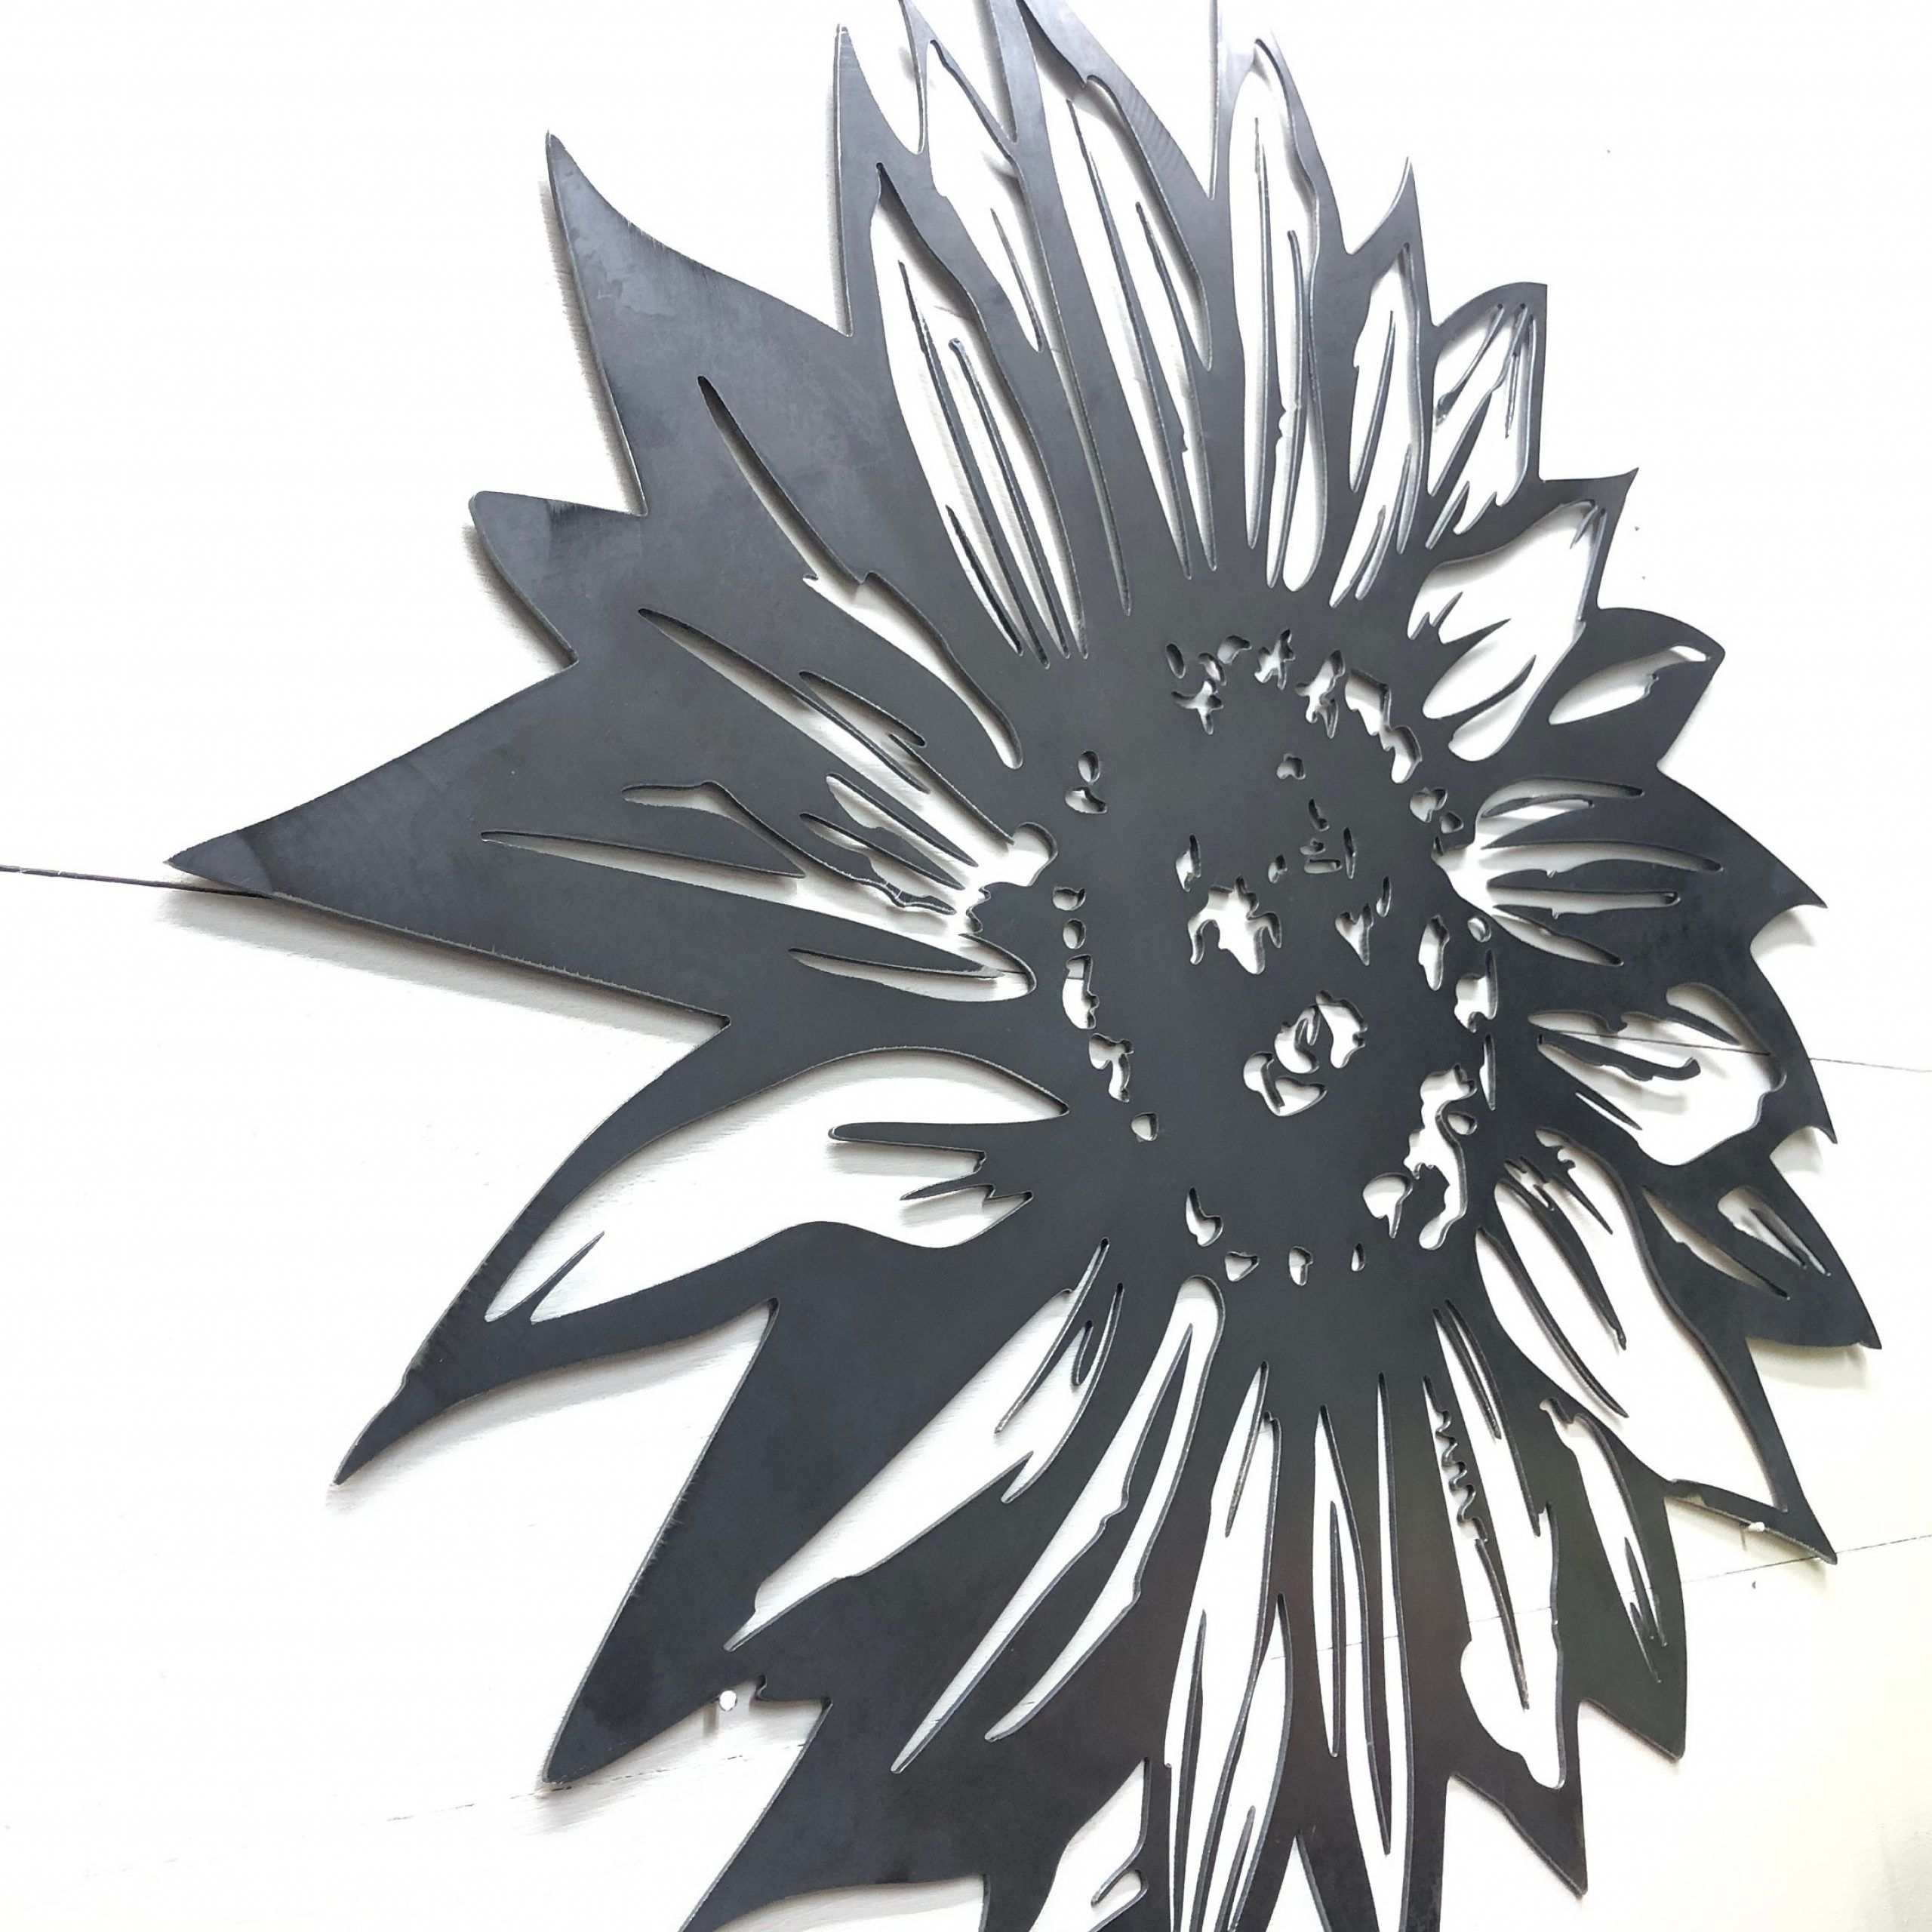 Industrial Metal Wall Art Regarding Best And Newest Rustic Industrial Sunflower Metal Wall Decor (View 8 of 15)